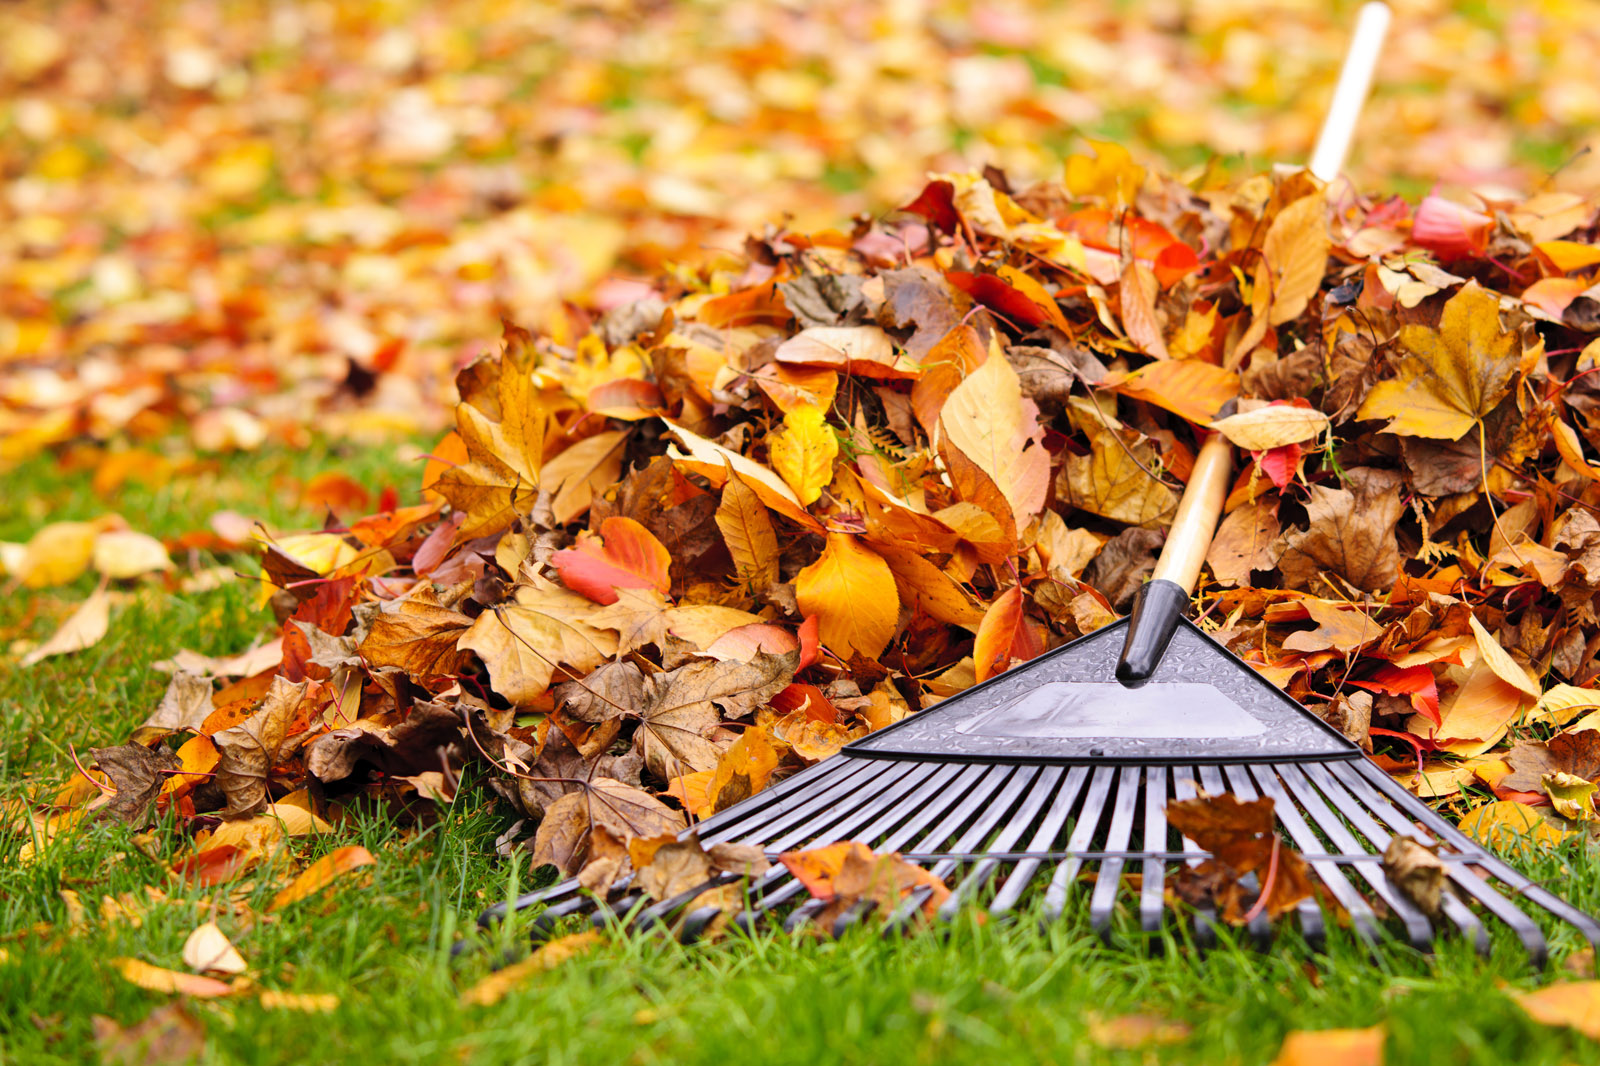 Garden Editor Mike McGrath says leaves are presents for your lawn. He recommends mowing the leaves promptly and using them for mulch. (Thinkstock) 